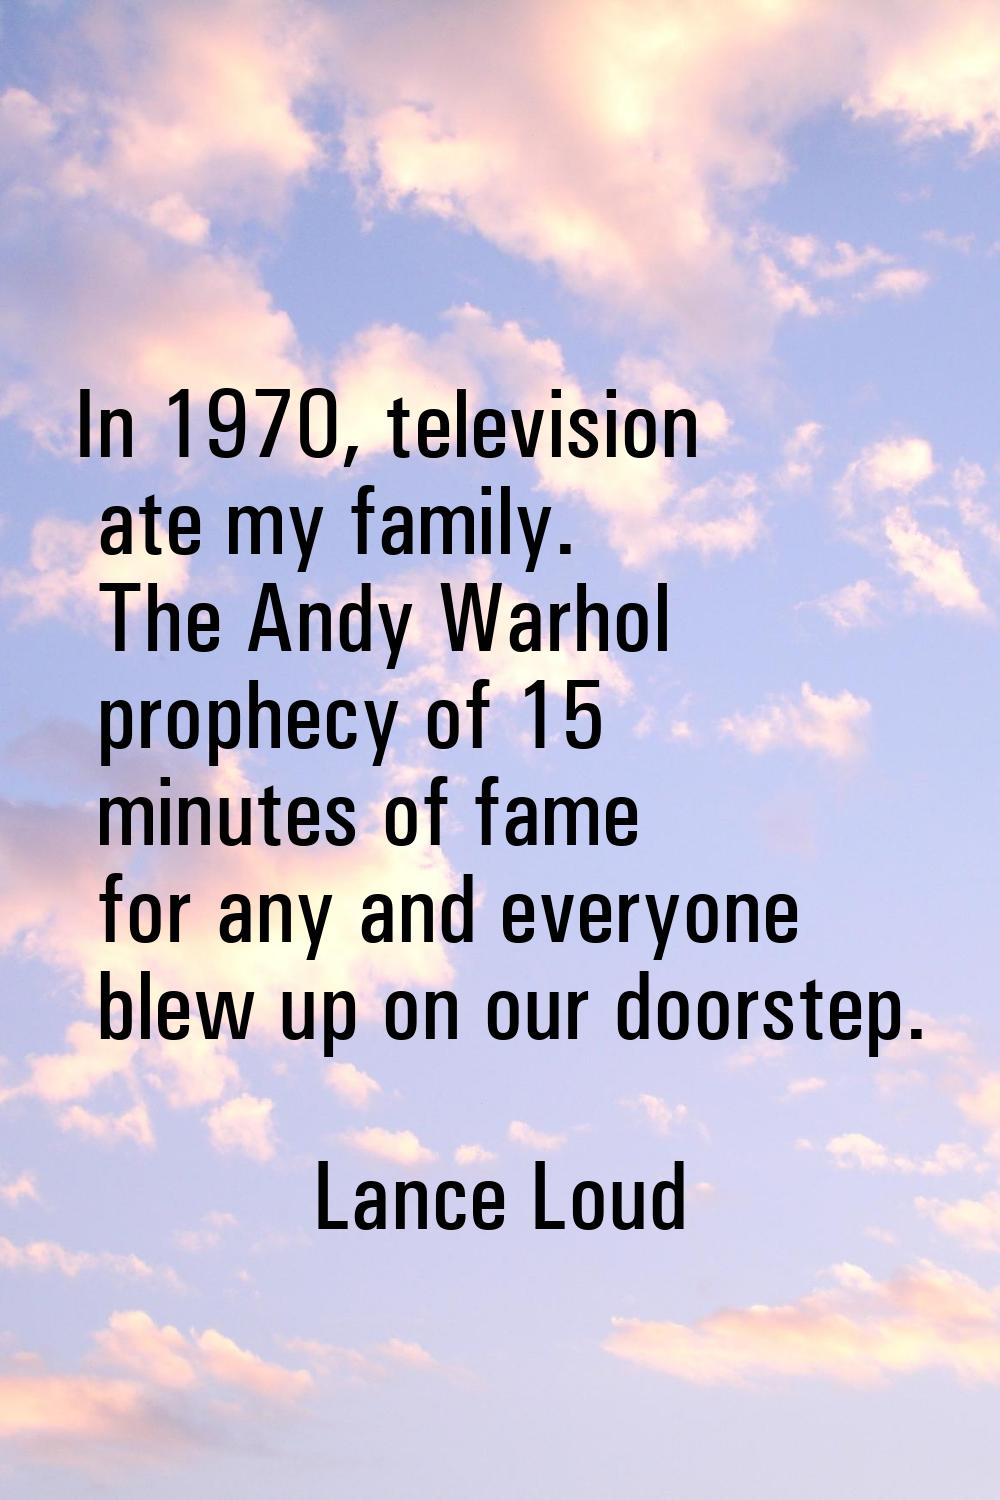 In 1970, television ate my family. The Andy Warhol prophecy of 15 minutes of fame for any and every